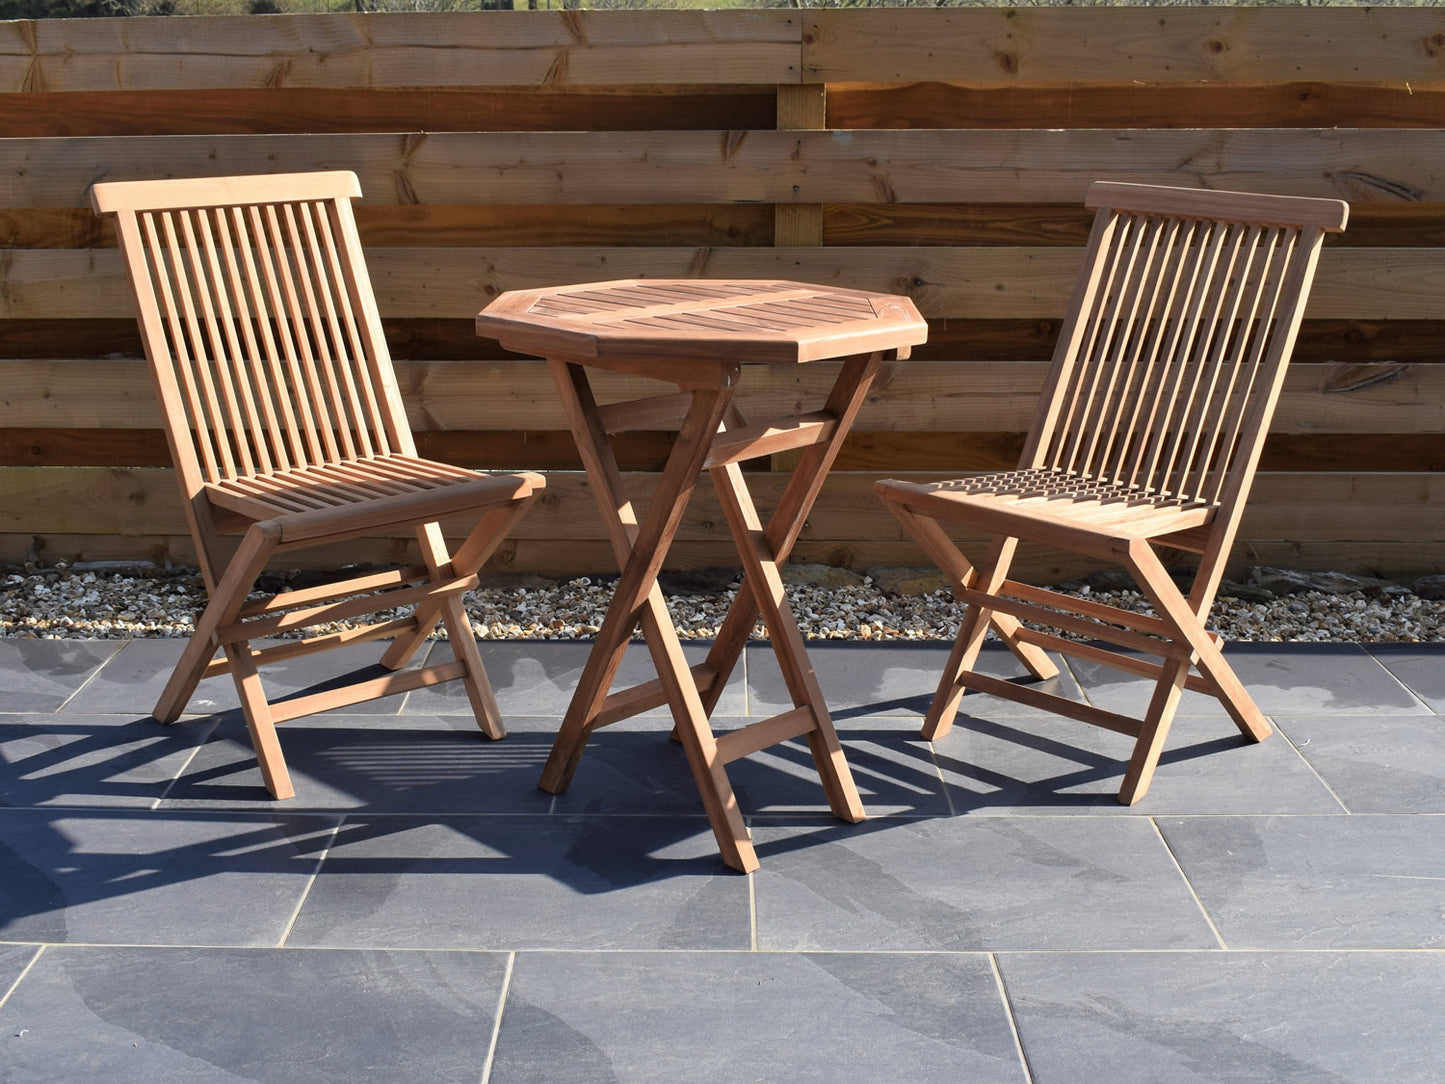 2 Seater Octagonal Folding Teak Set with Classic Folding Chairs